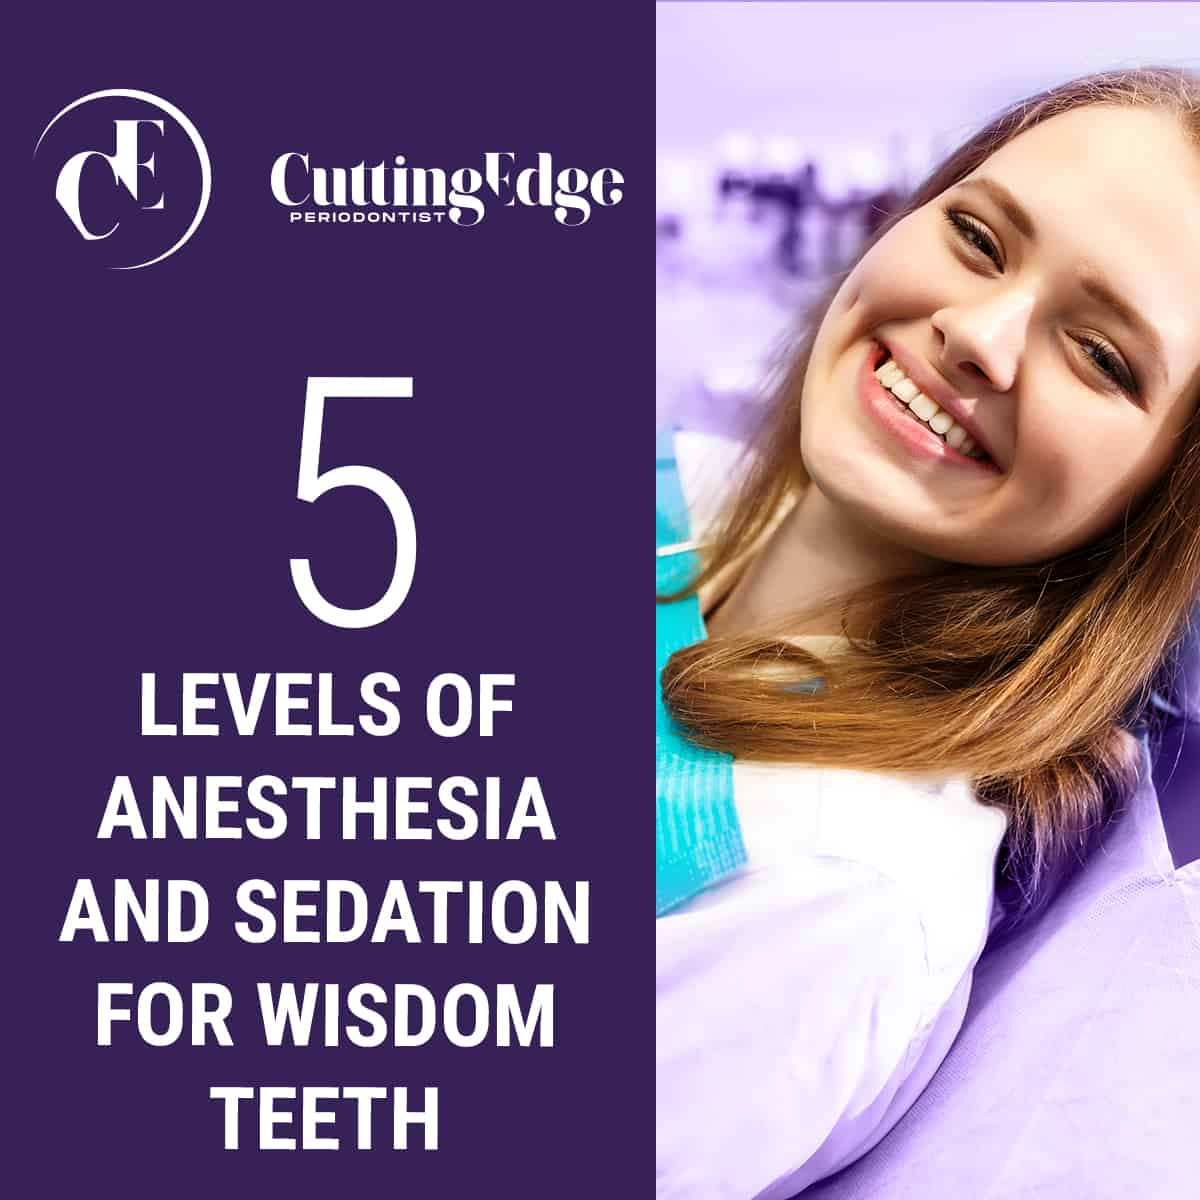 5 Levels of Anesthesia and Sedation for Wisdom Teeth